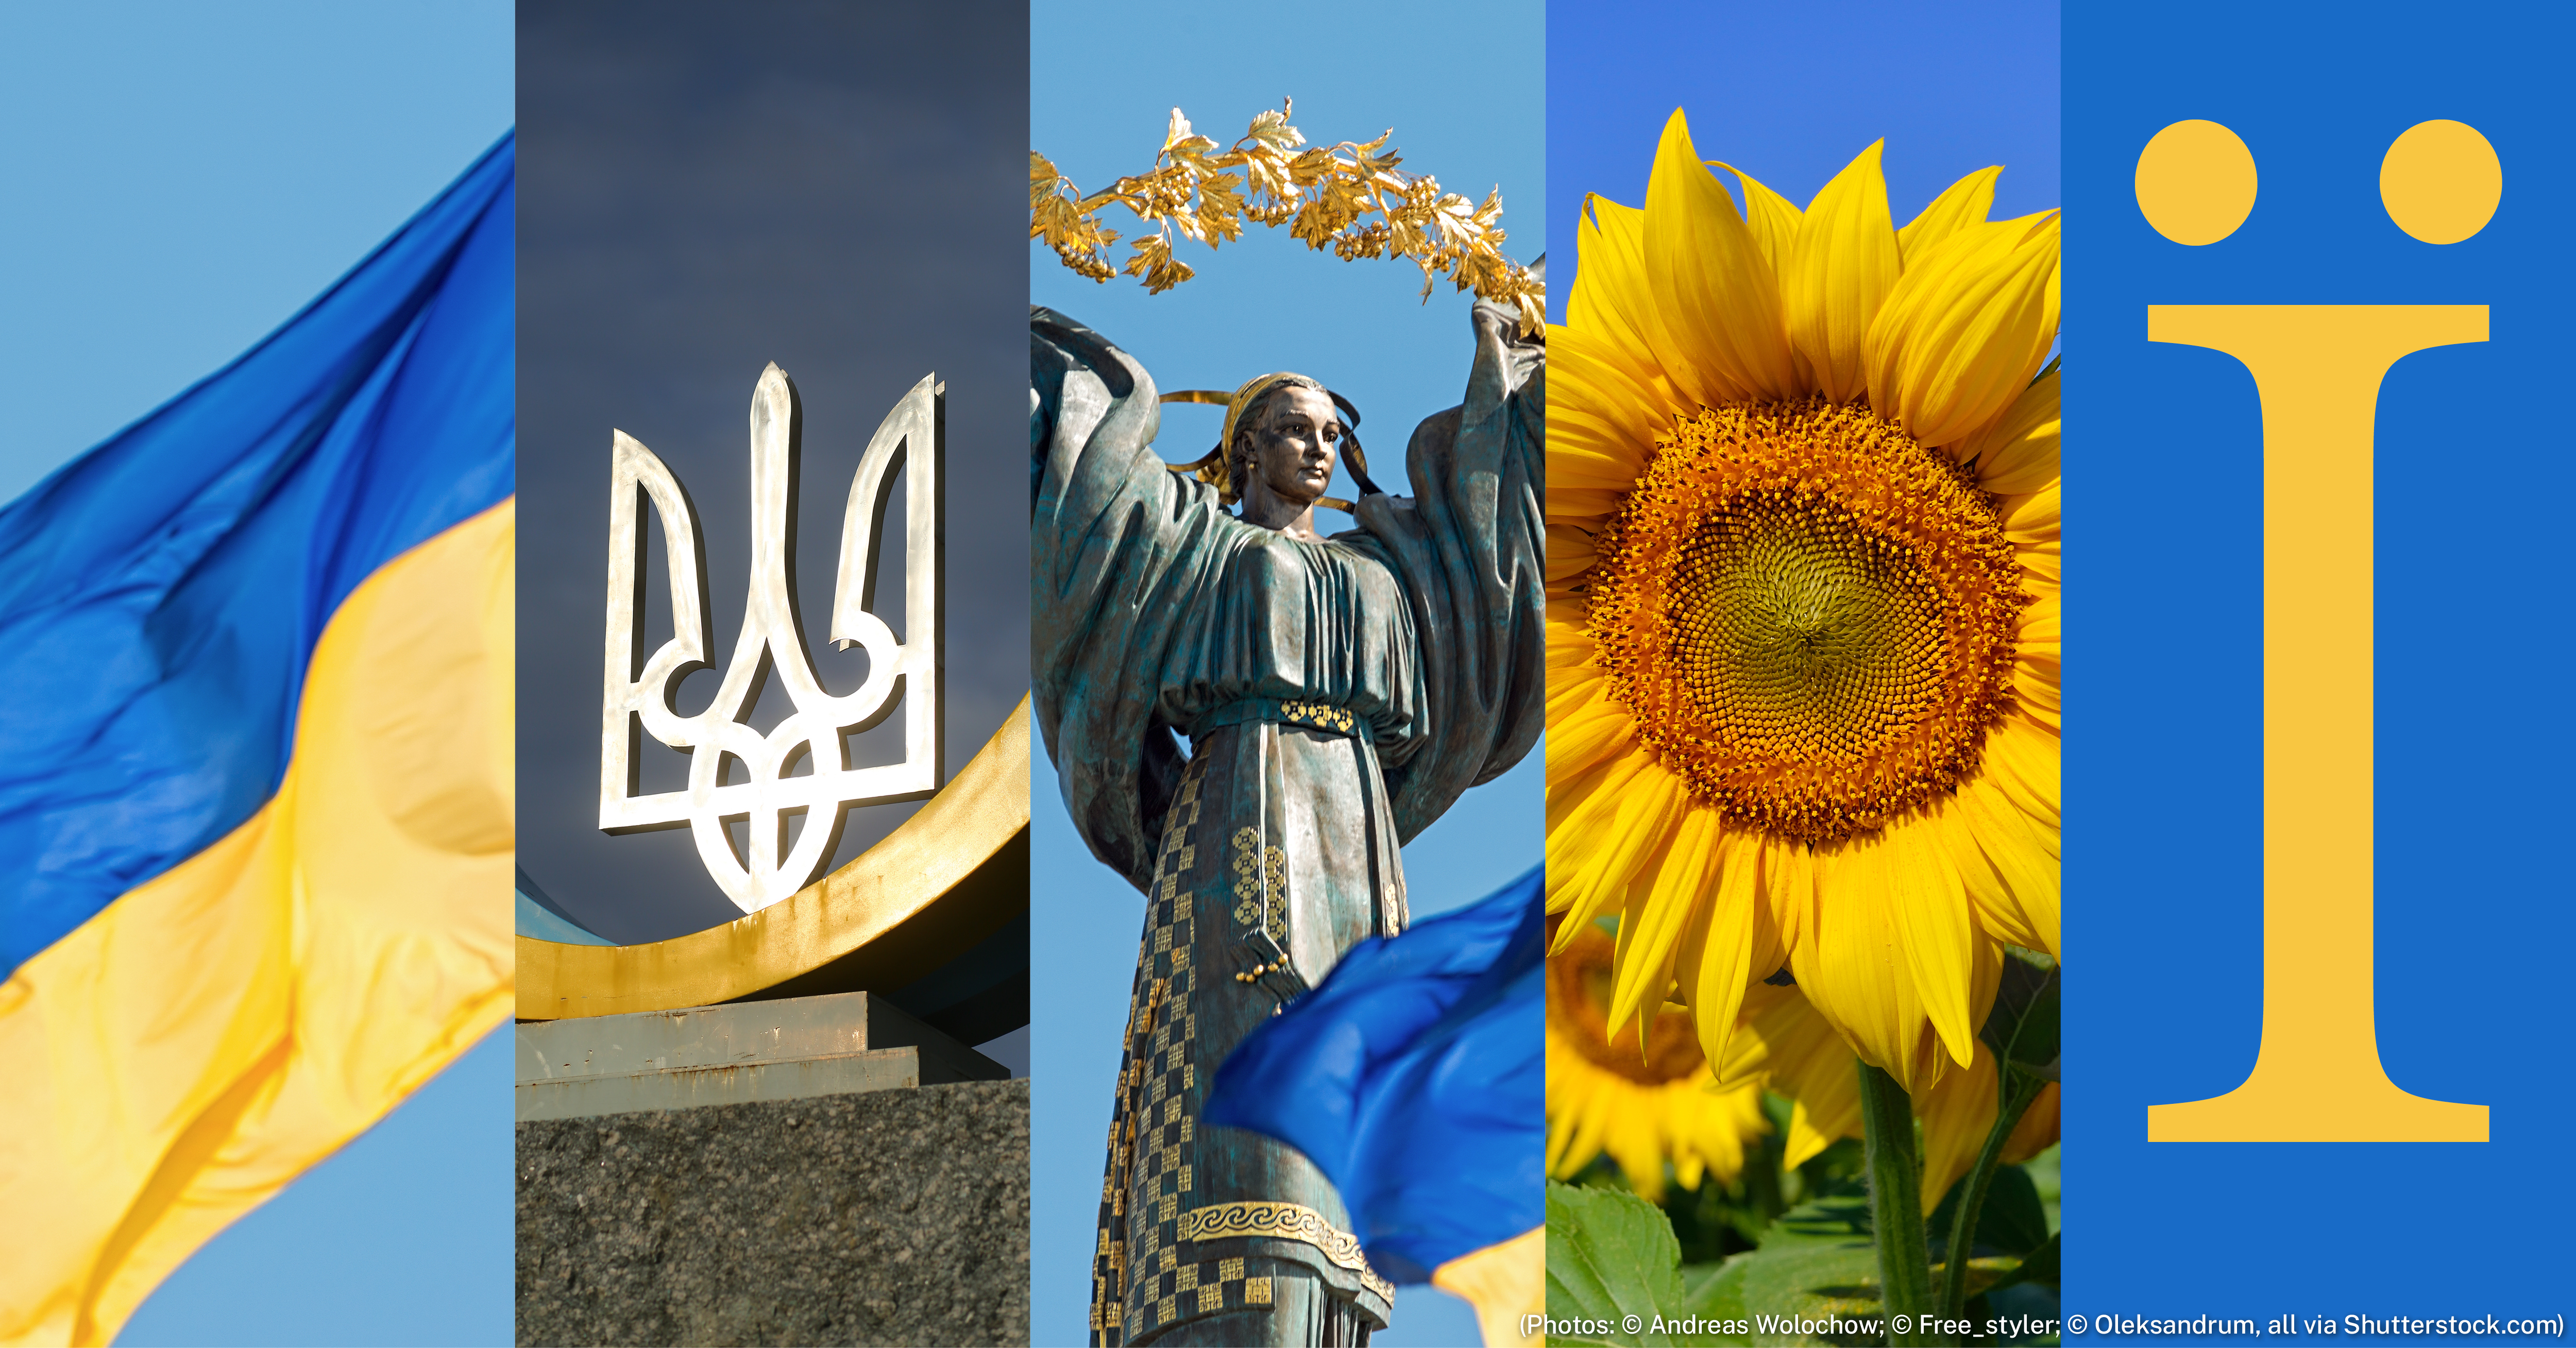 Five symbols of Ukraine: flag, trident, independence statue, sunflower, and letter 'i' with two dots above it (Photos: © Andreas Wolochow, © Free_styler, and © Oleksandrum, all via Shutterstock.com)